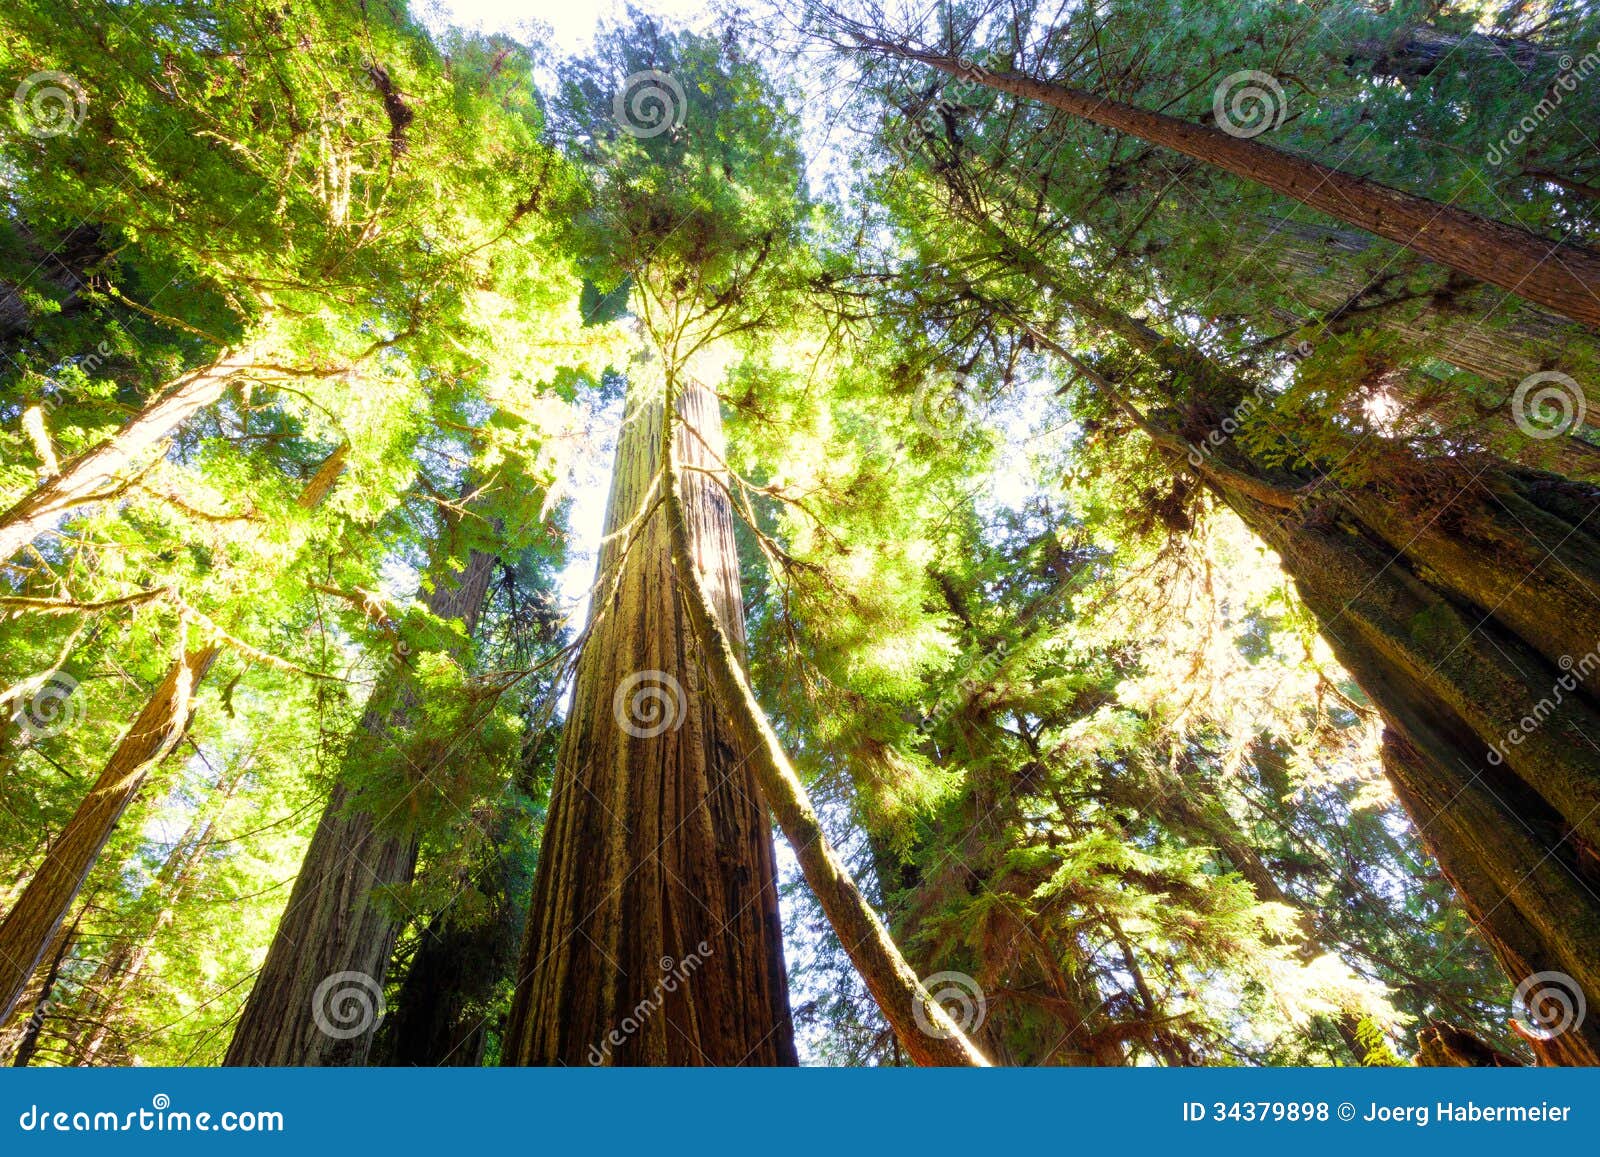 tall old growth redwood trees in sunlight